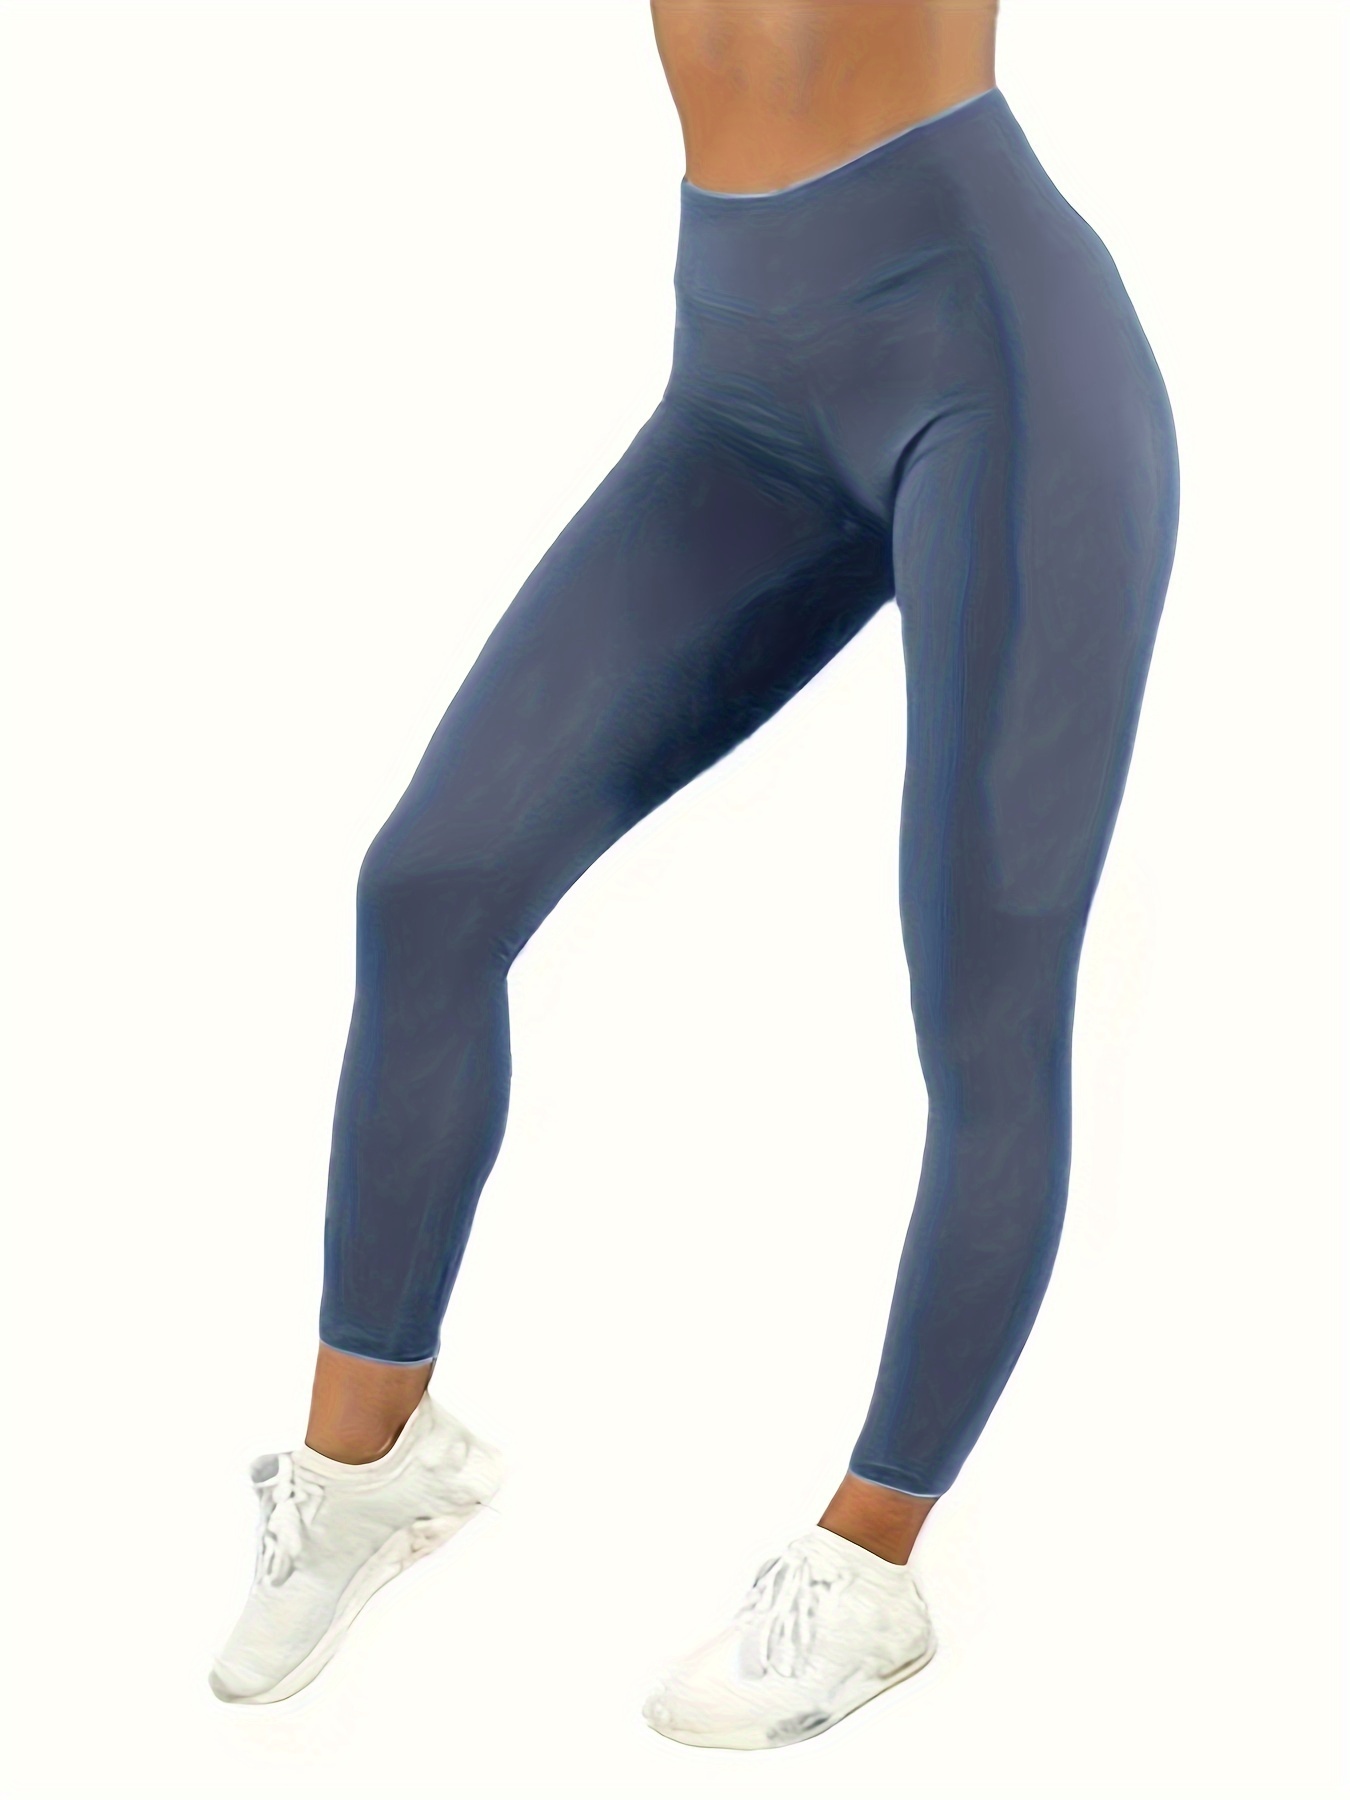 Buy VOOVEEYA High Waisted Yoga Leggings with Back Pockets for Women Butt  Lift, Tummy Control Workout Pants with Denim Pattern, Blue, Large at